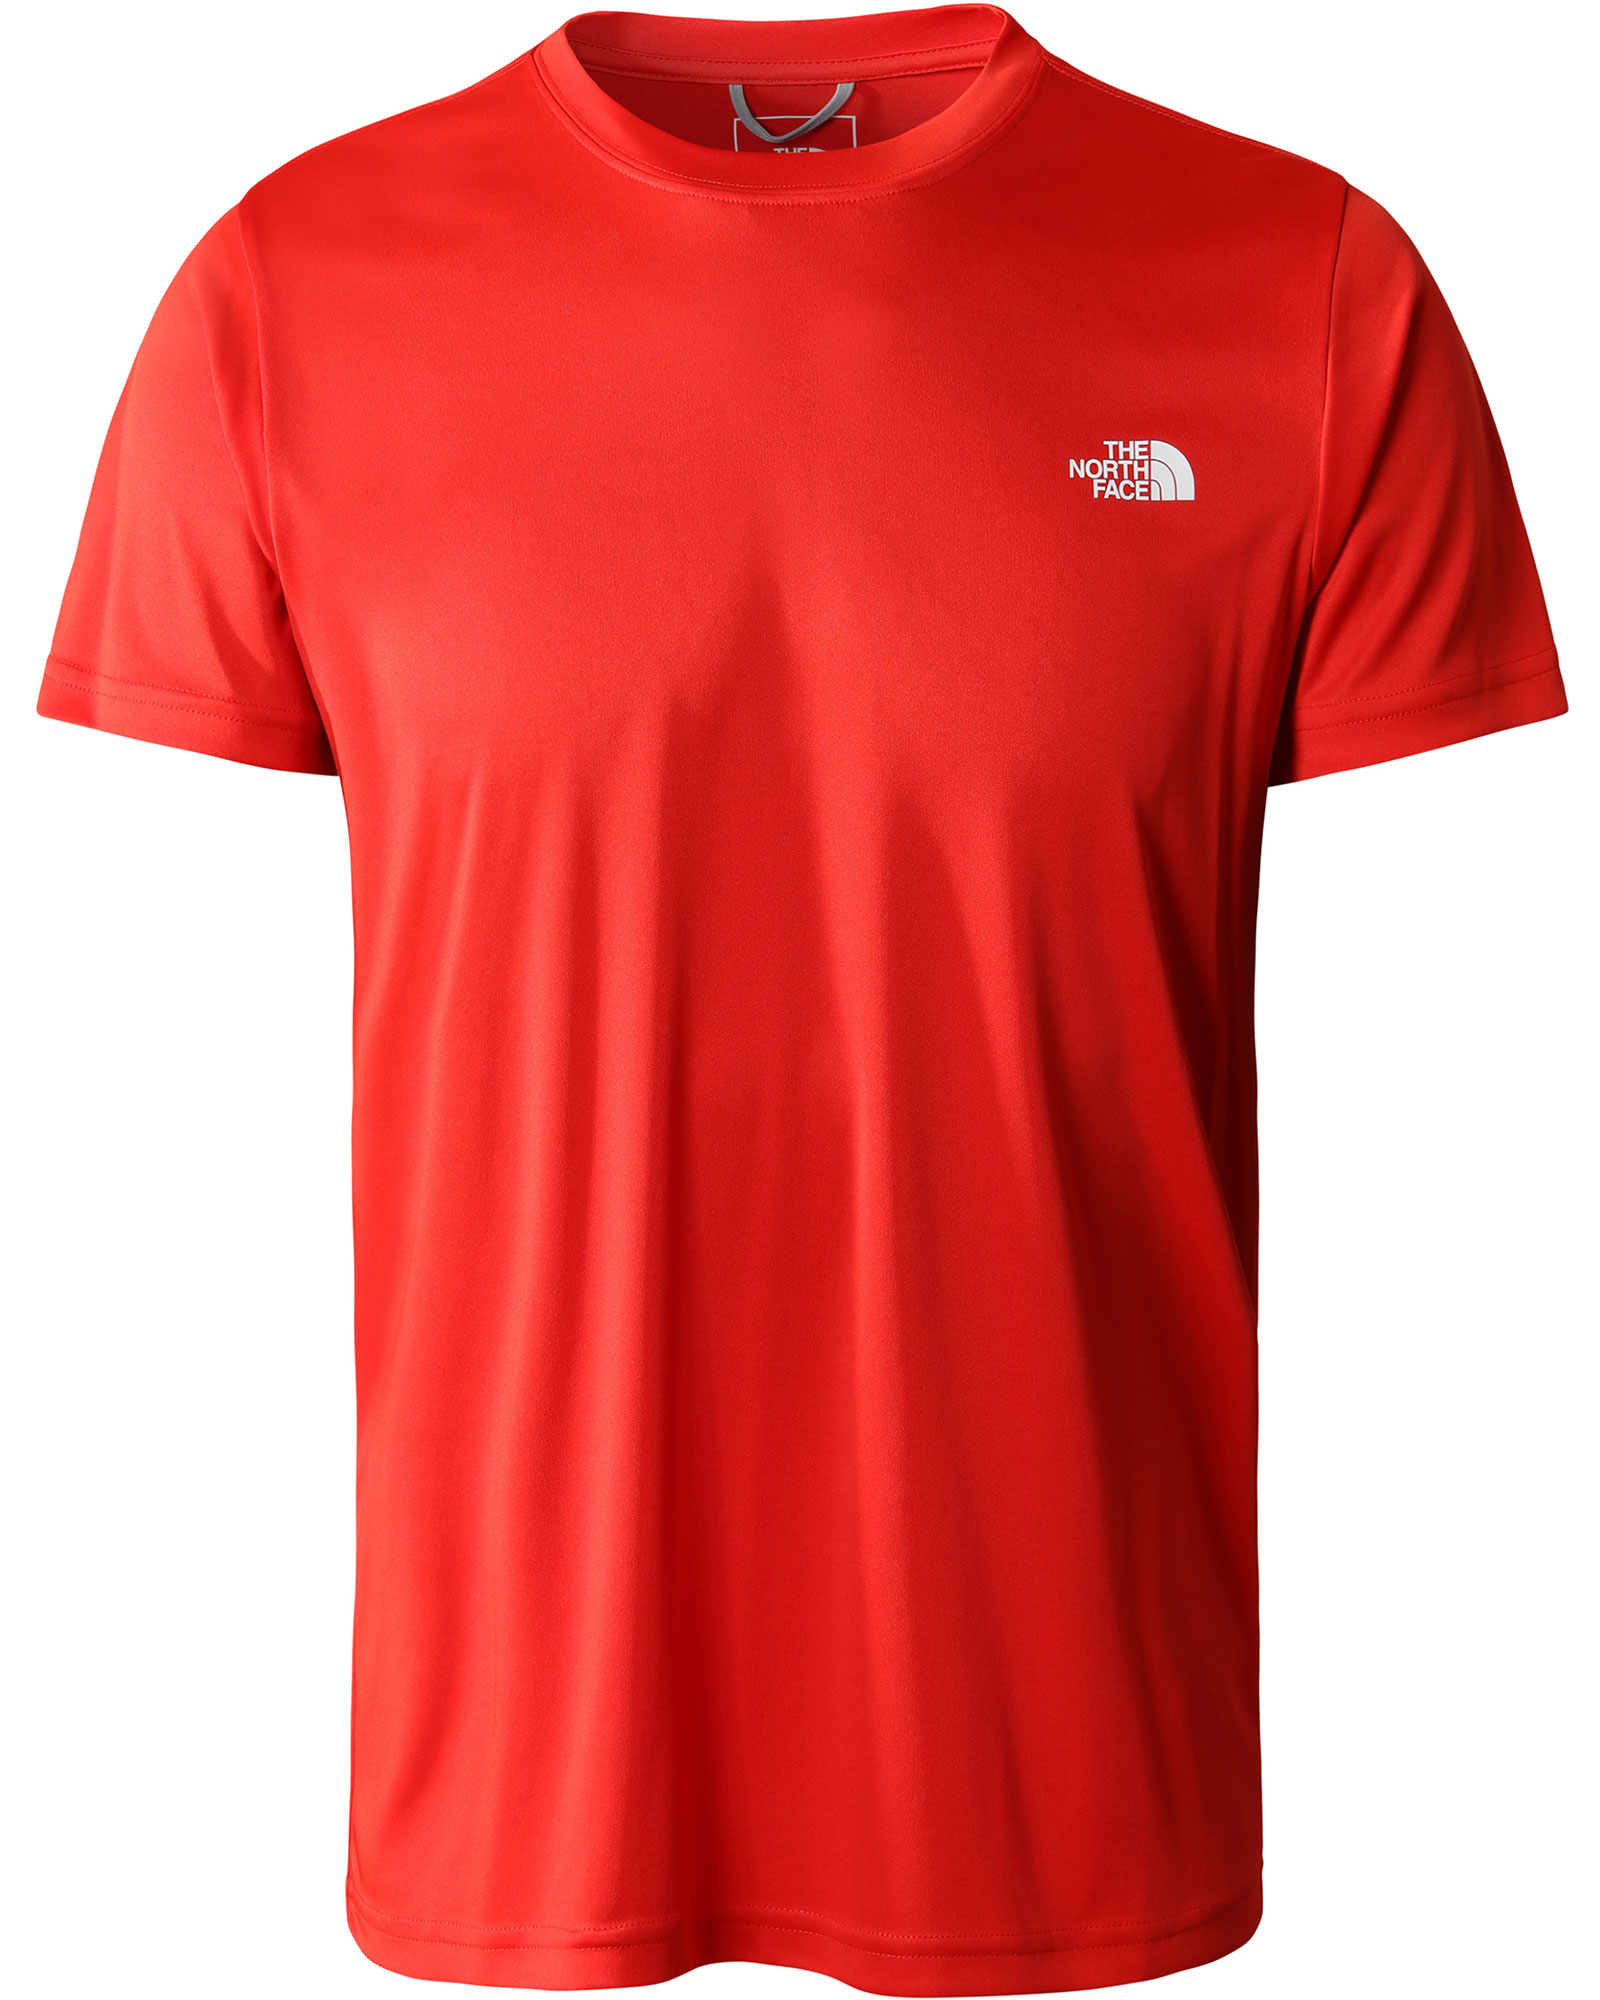 The North Face Reaxion Amp Men’s Crew T Shirt - Fiery Red S